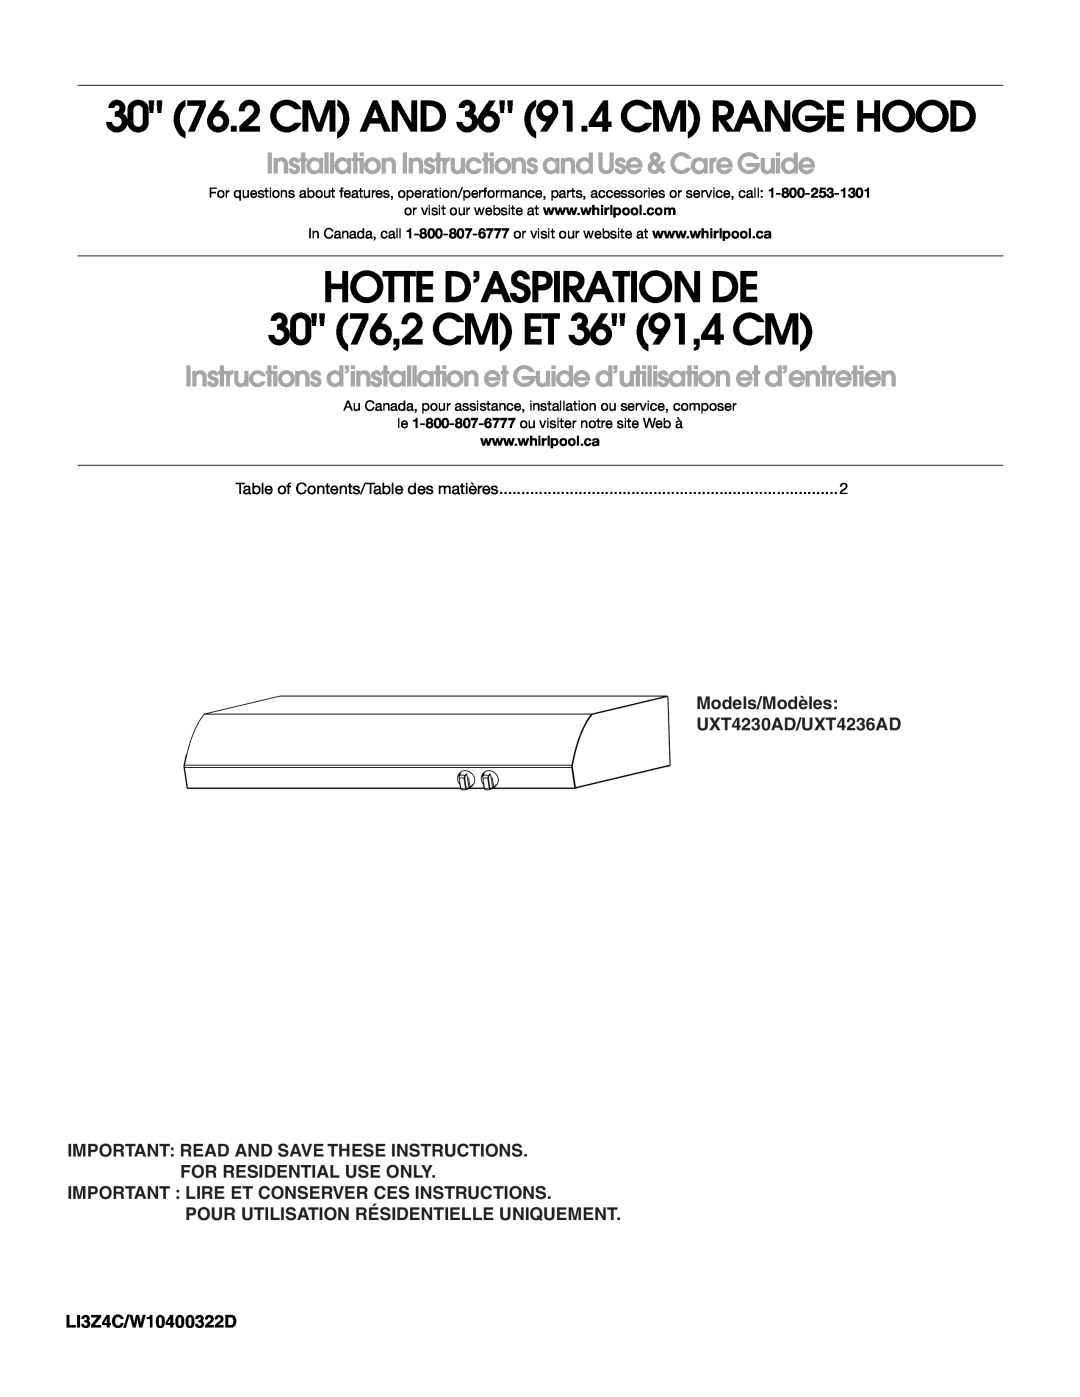 Whirlpool installation instructions Models/Modèles UXT4230AD/UXT4236AD, Important Read And Save These Instructions 